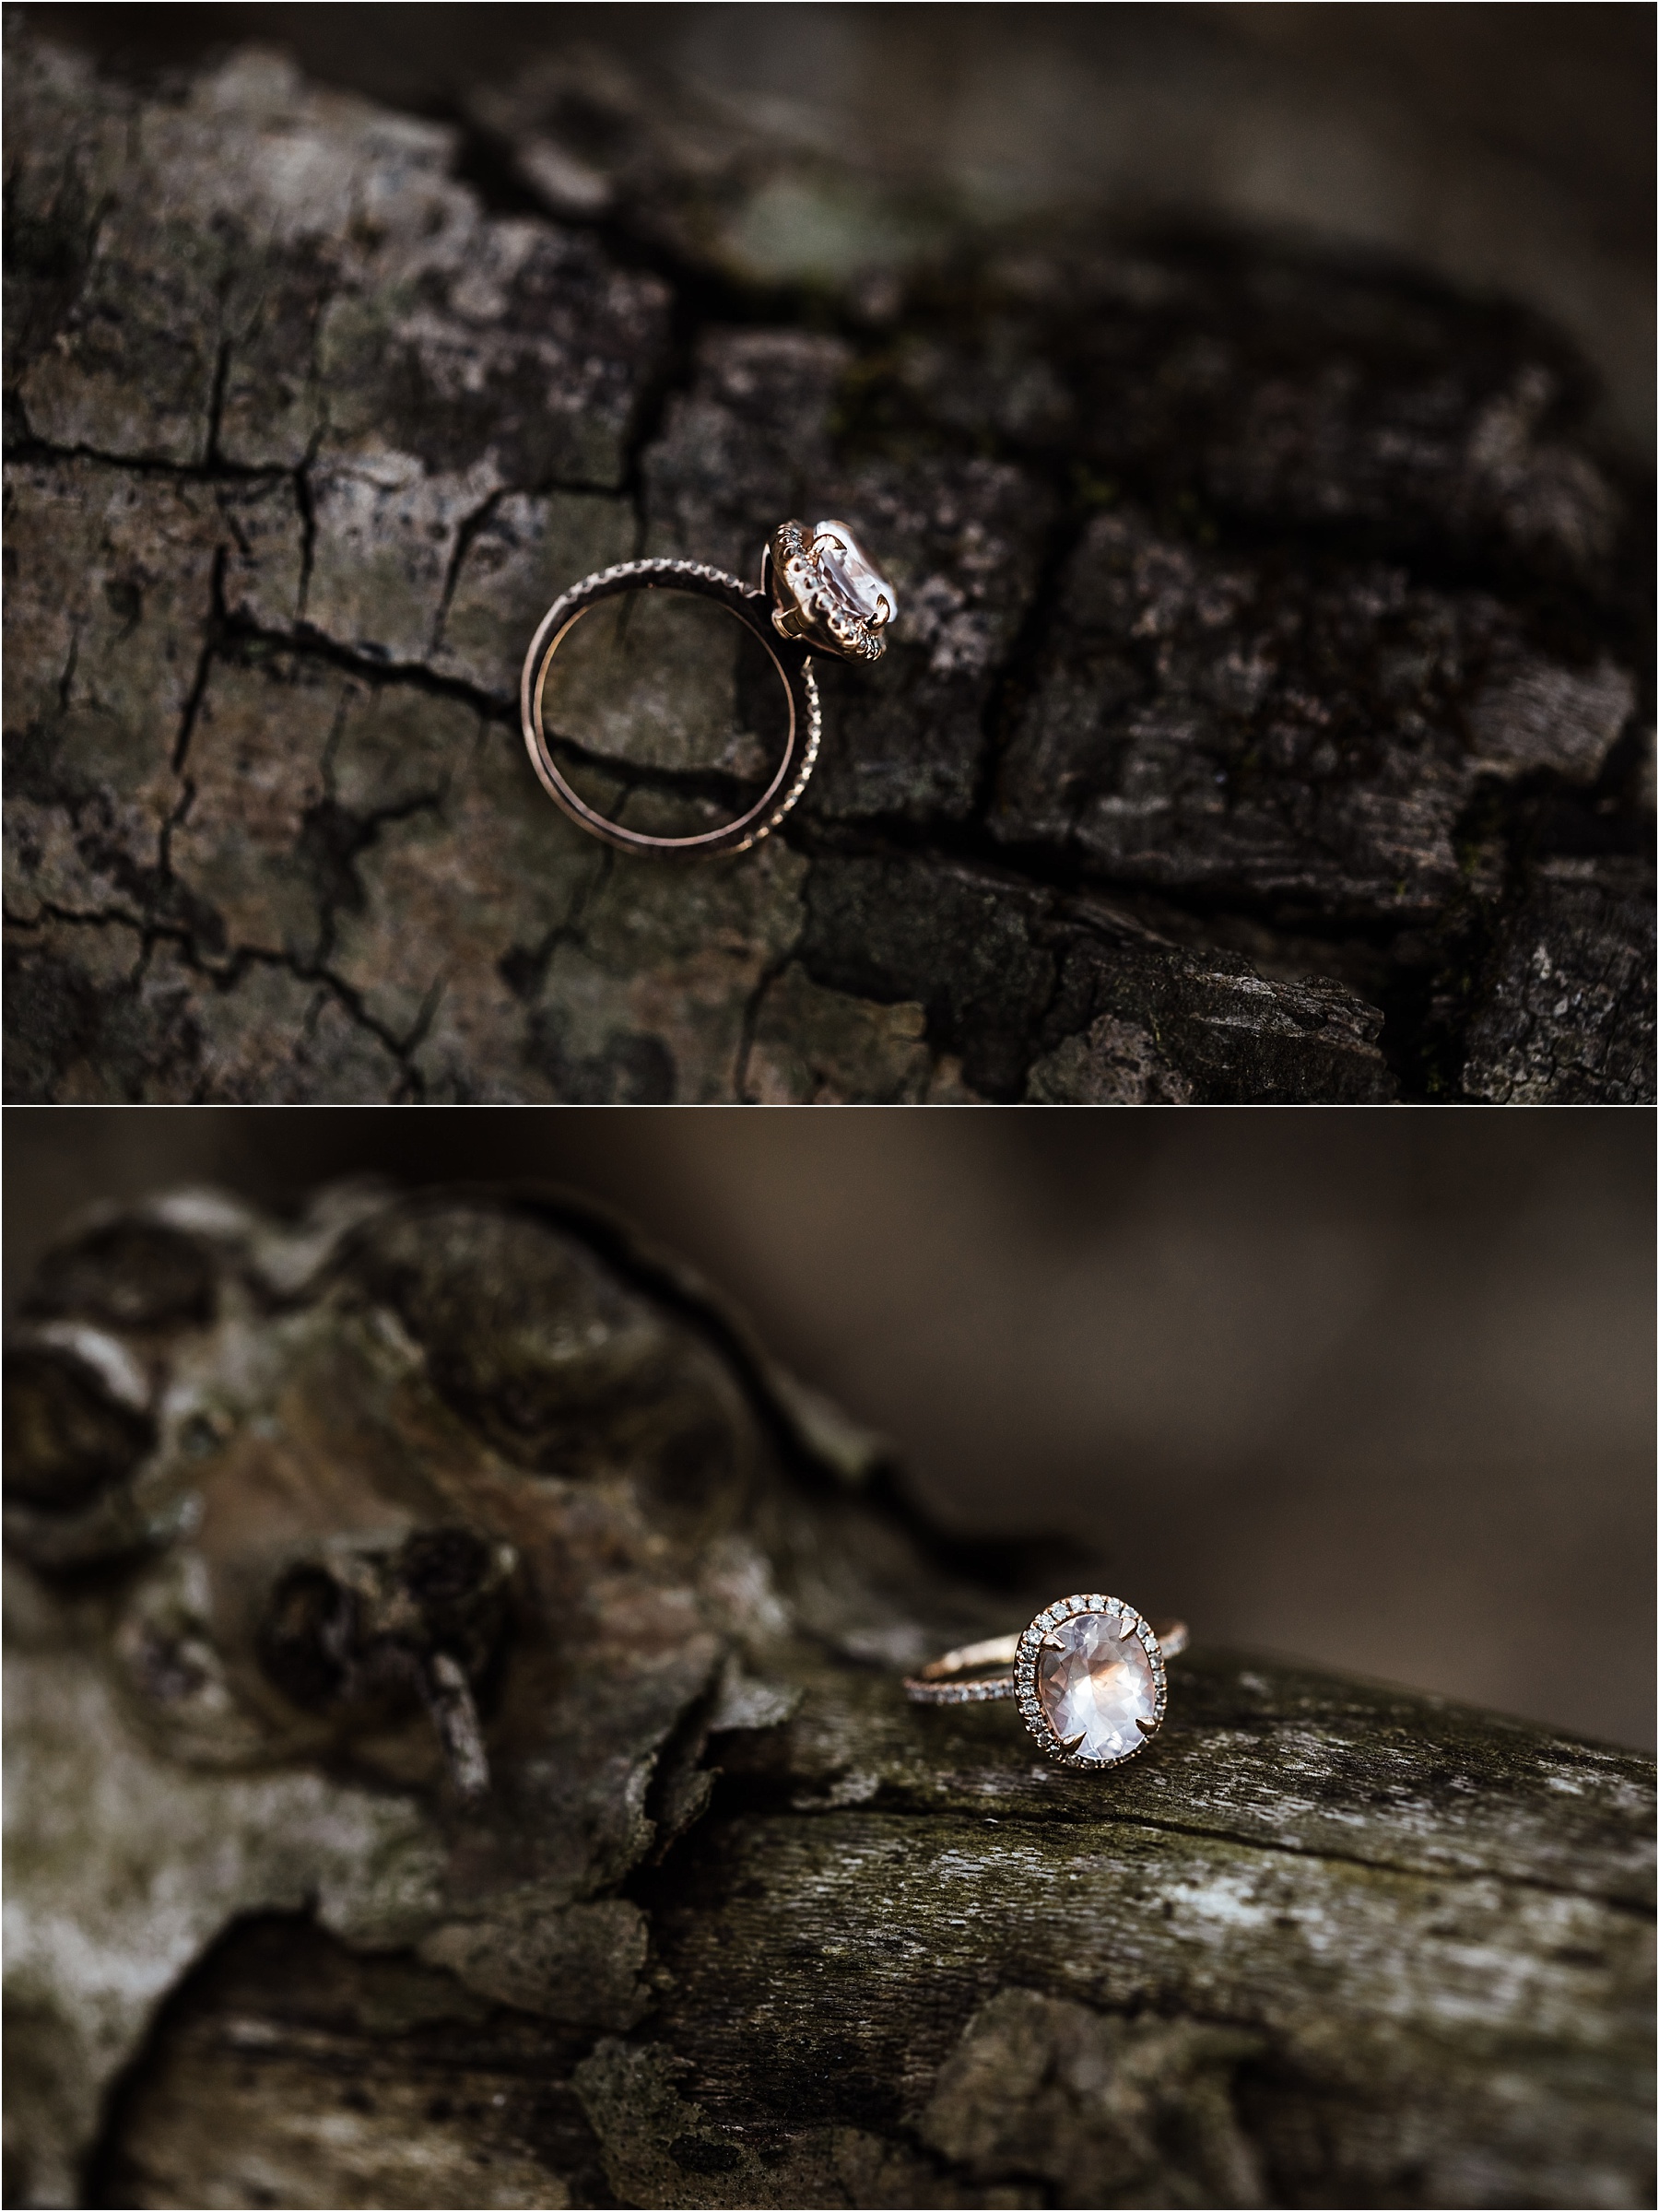 winter forest engagement session